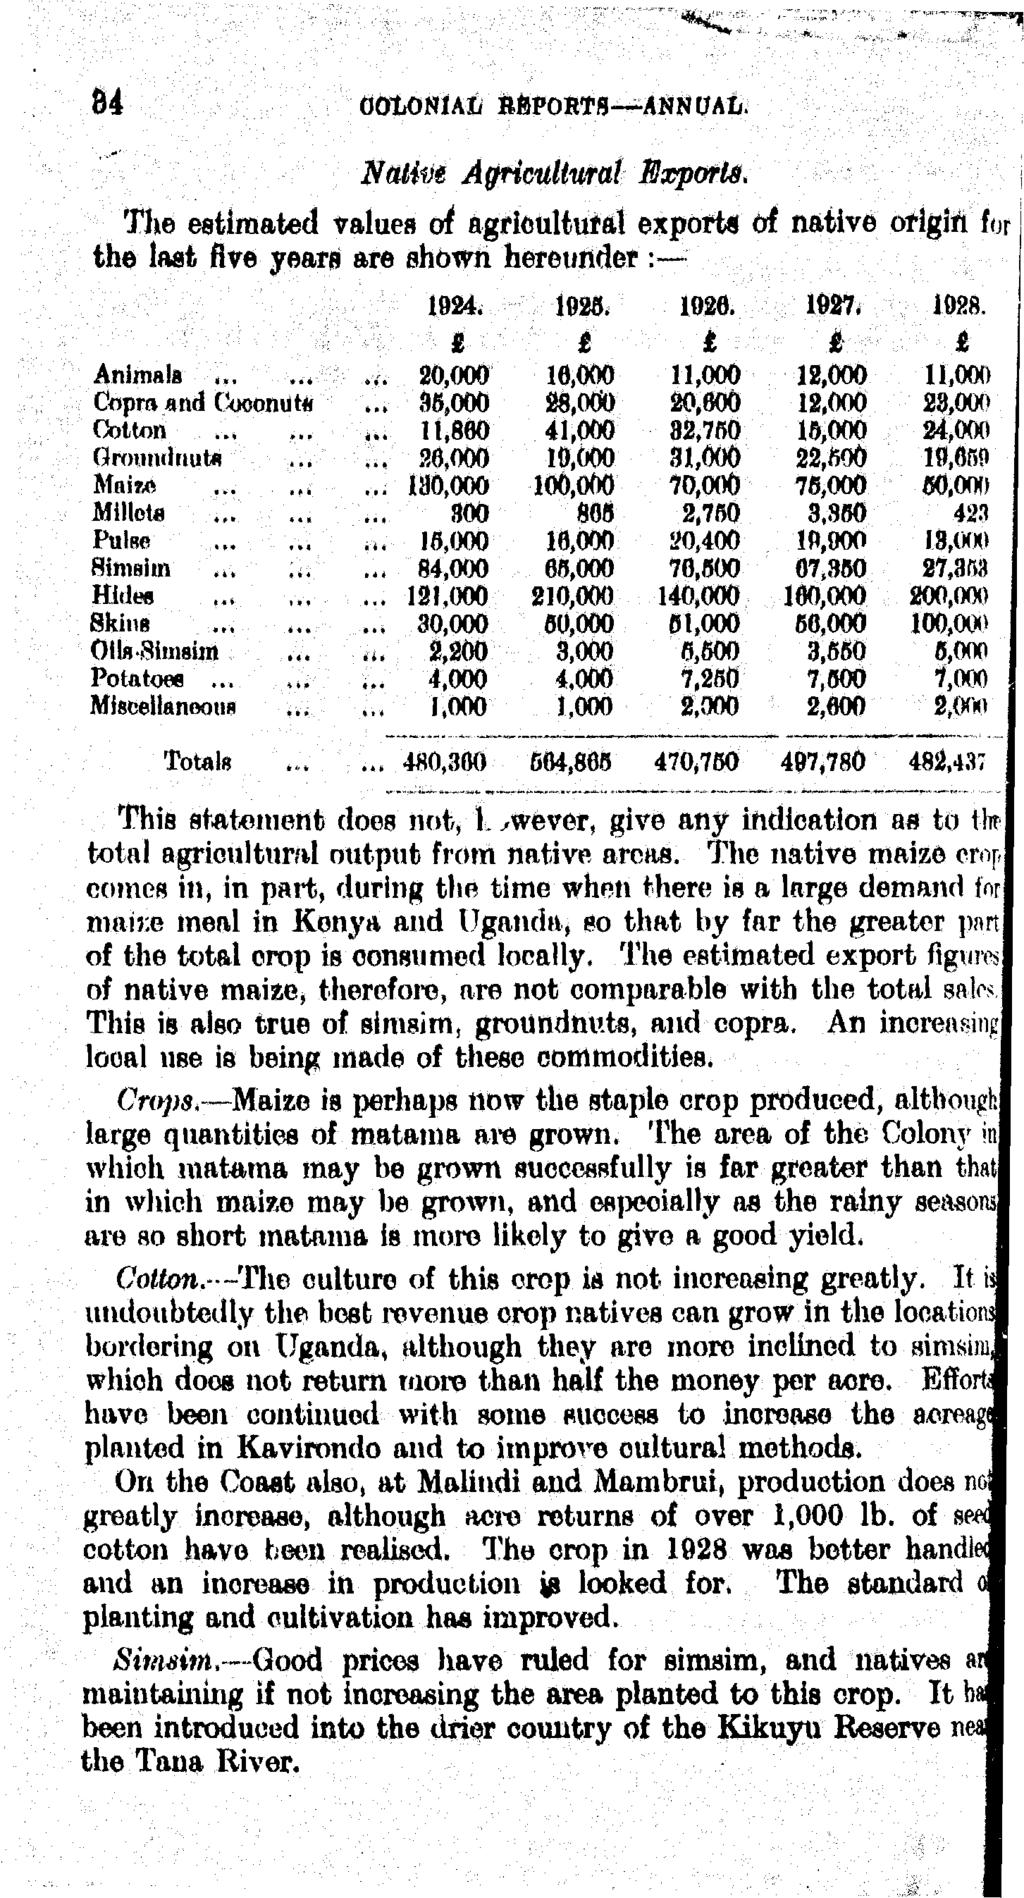 84 OOliOMAIi B6PORT8 ANNUAL. Native Agricultural Exports. The estimated values of agricultural exports of native origin for the last five years are shown hereunder: 1924. 1026. 1926. 1927. 1928.